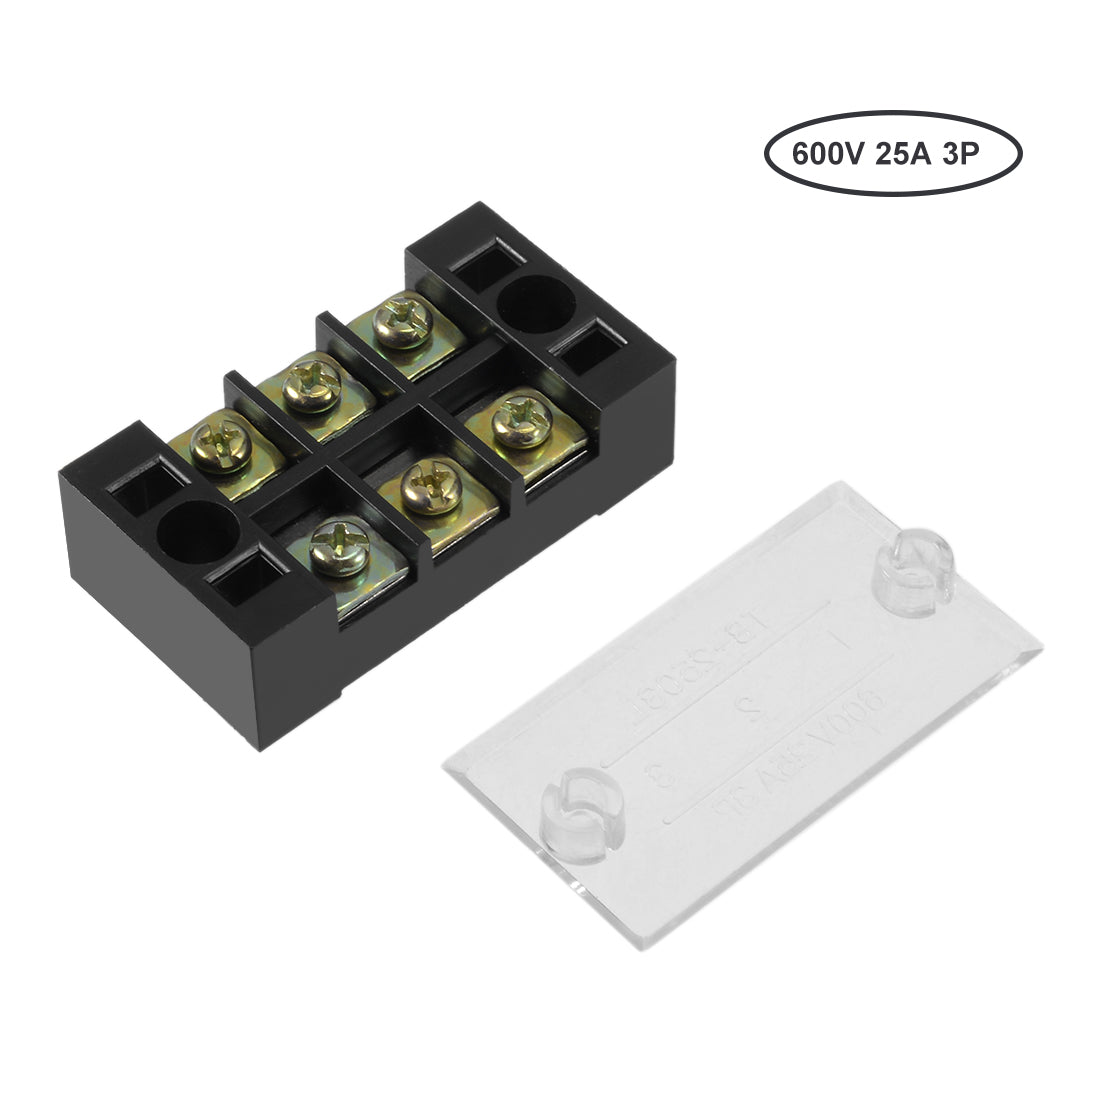 uxcell Uxcell 2 Pcs Dual Rows 3 Positions 600V 25A Cable Barrier Block Terminal Strip TB-2503L